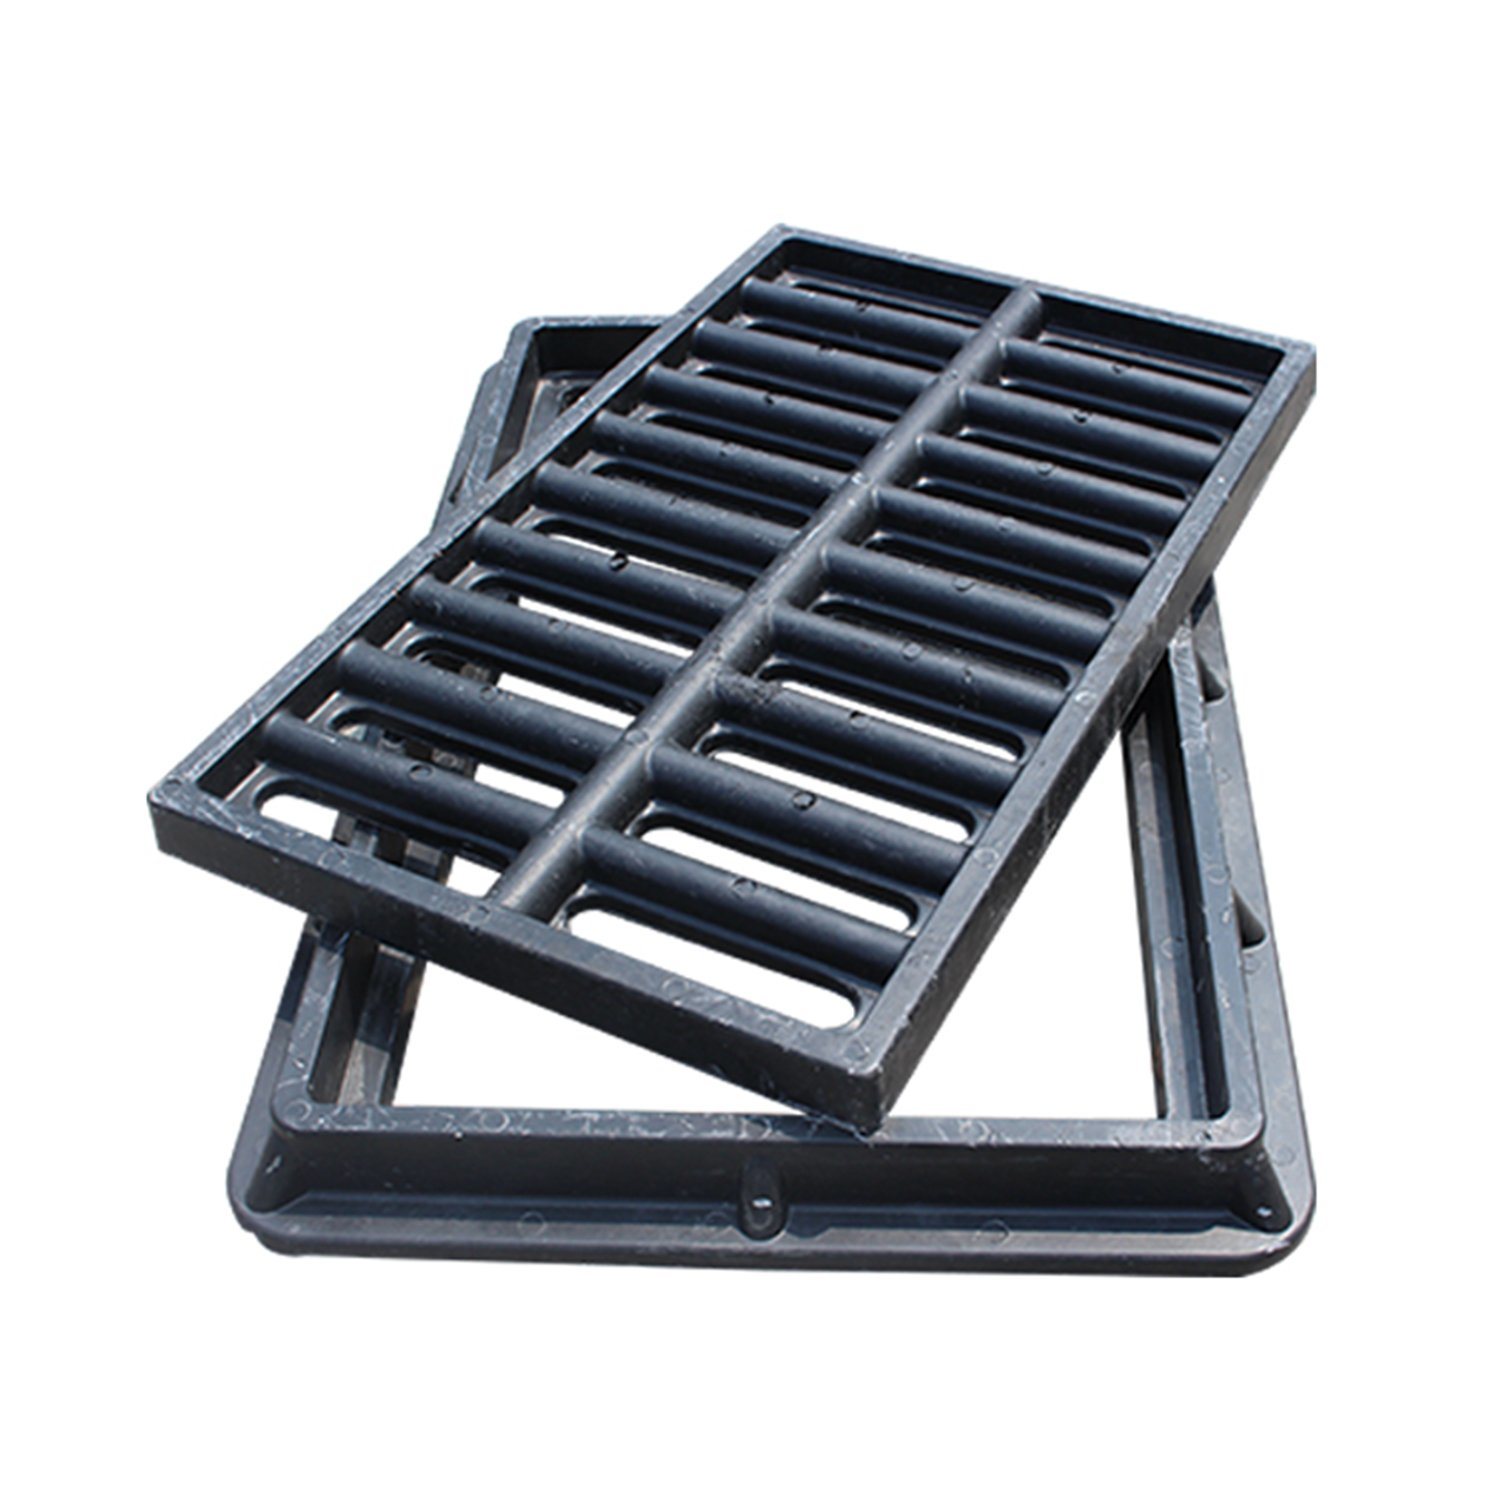 Sab Nraum Dej Grate Trench Driveway Cast Iron Drain Cover Gully Gates Featured Image